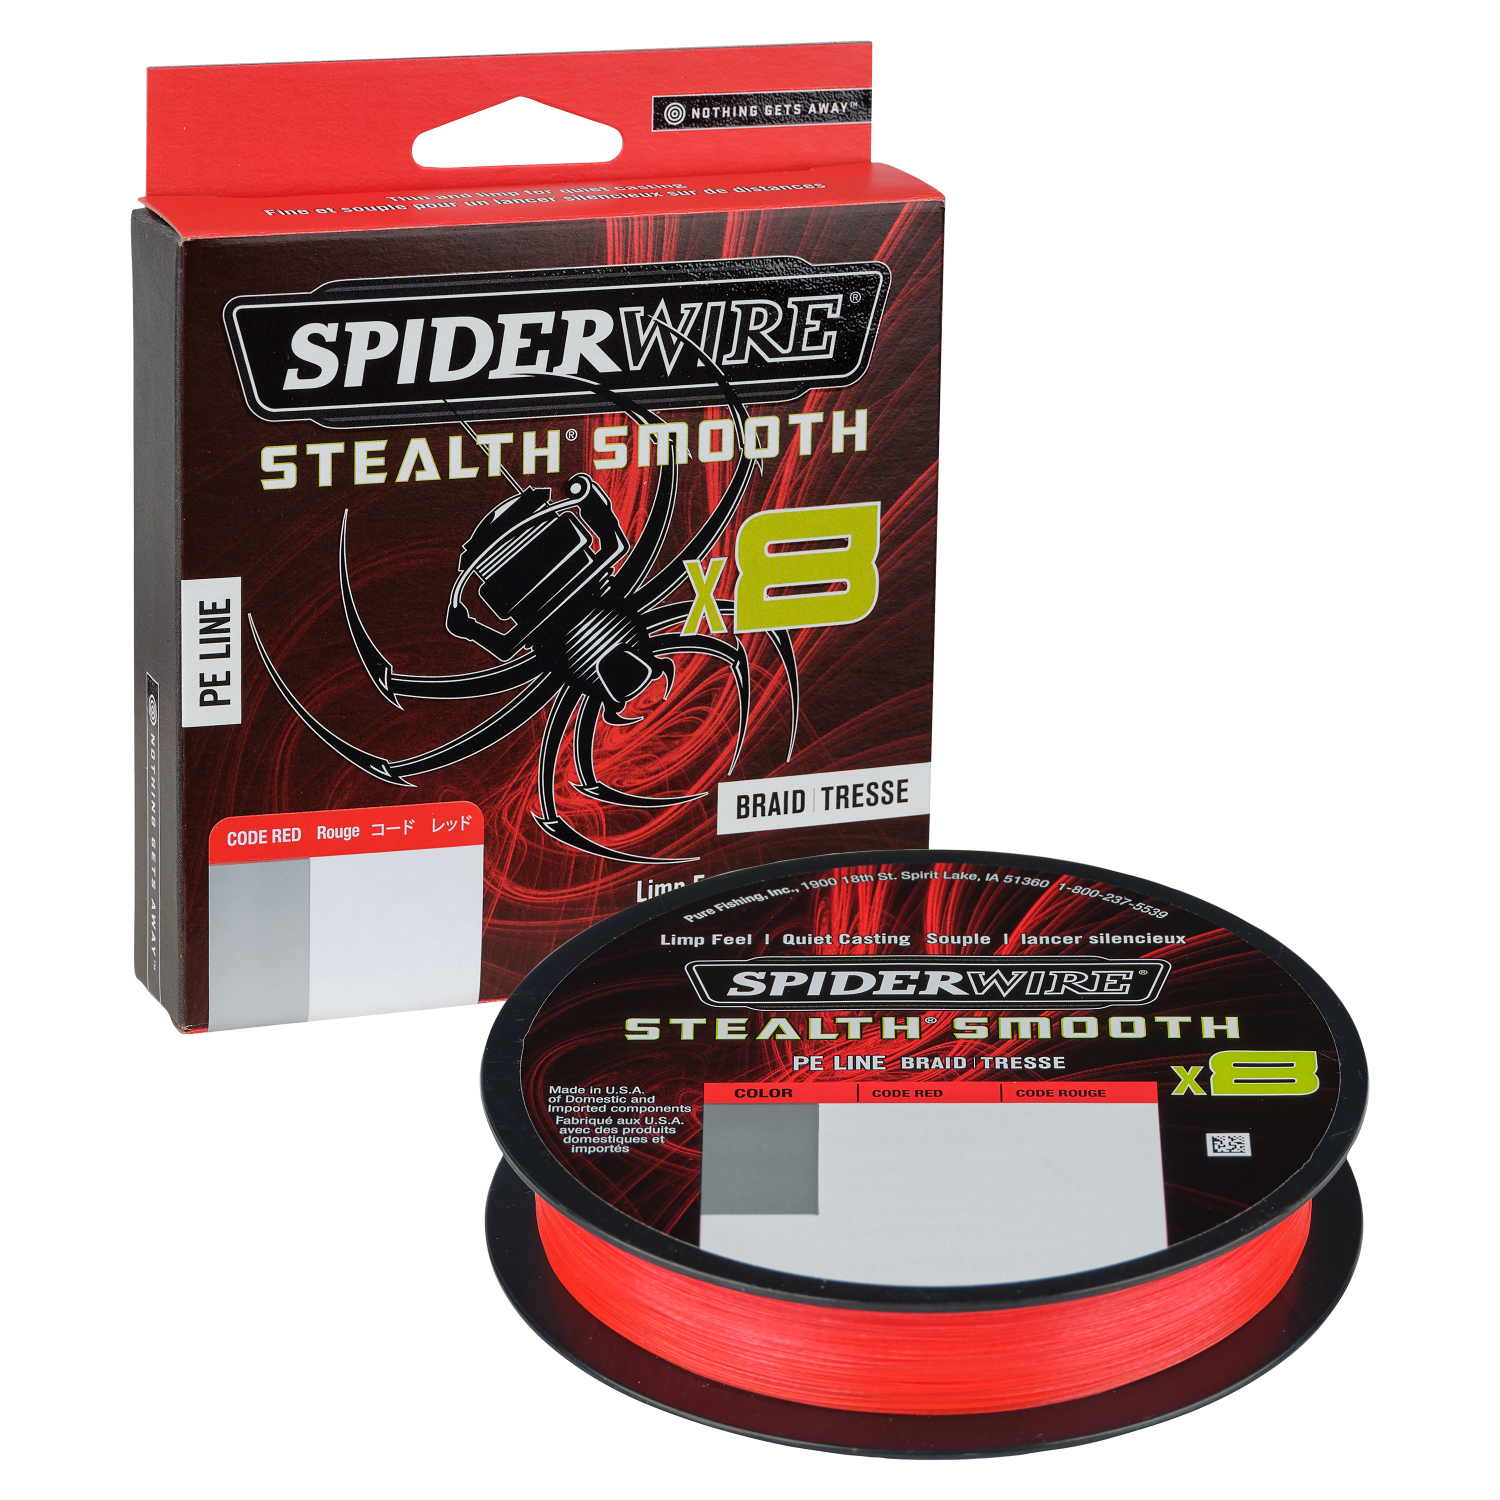 Spiderwire Fishing Line Stealth Smooth 8 (Red, 150 m) at low prices